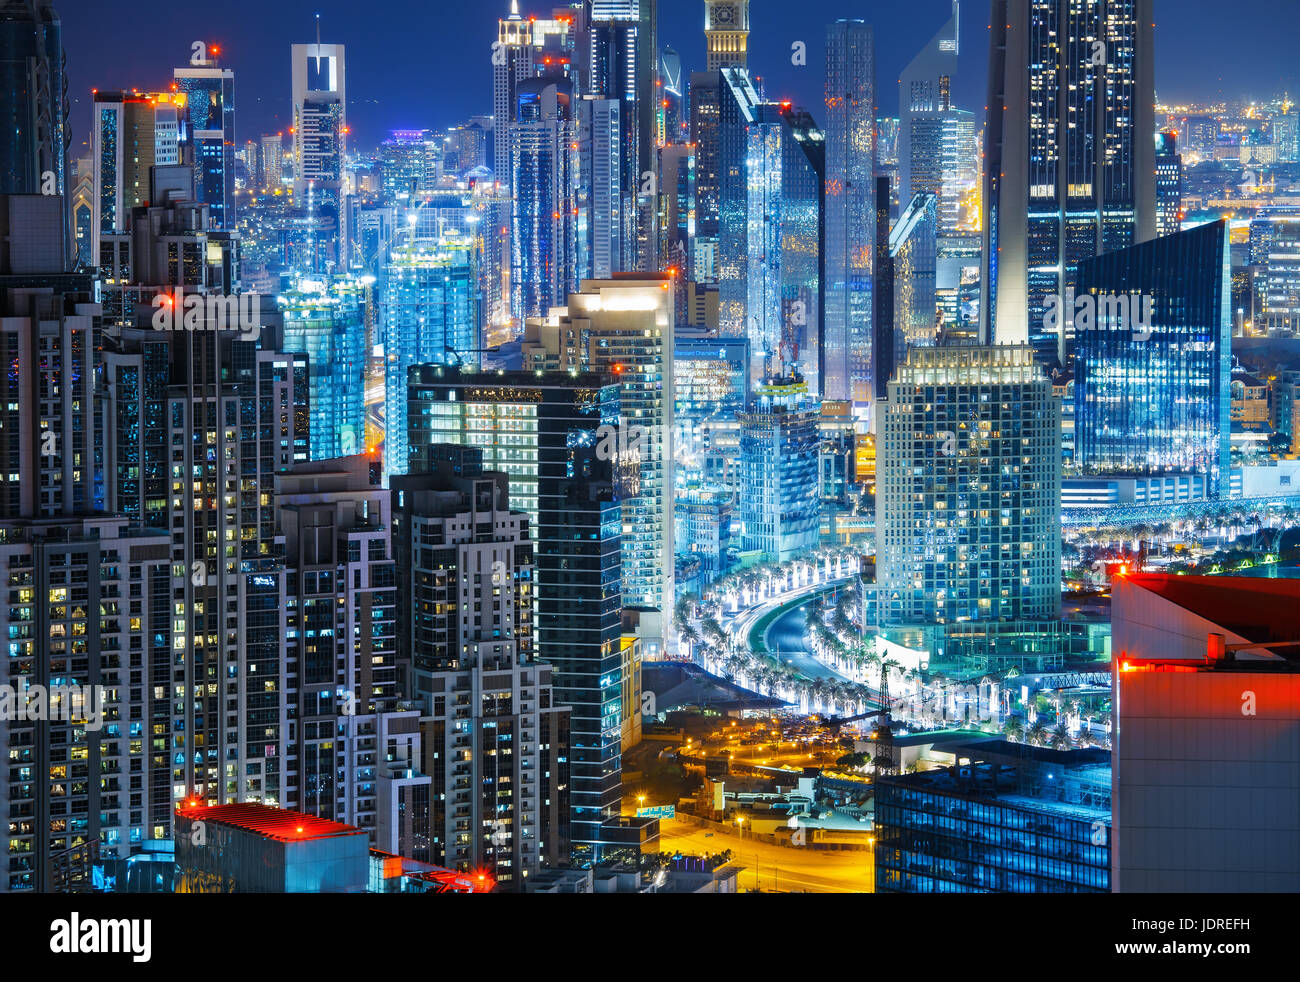 Spectacular elevated view over a big modern city at night with illuminated skyscrapers. Architecture of downtown Dubai, United Arab Emirates. Stock Photo